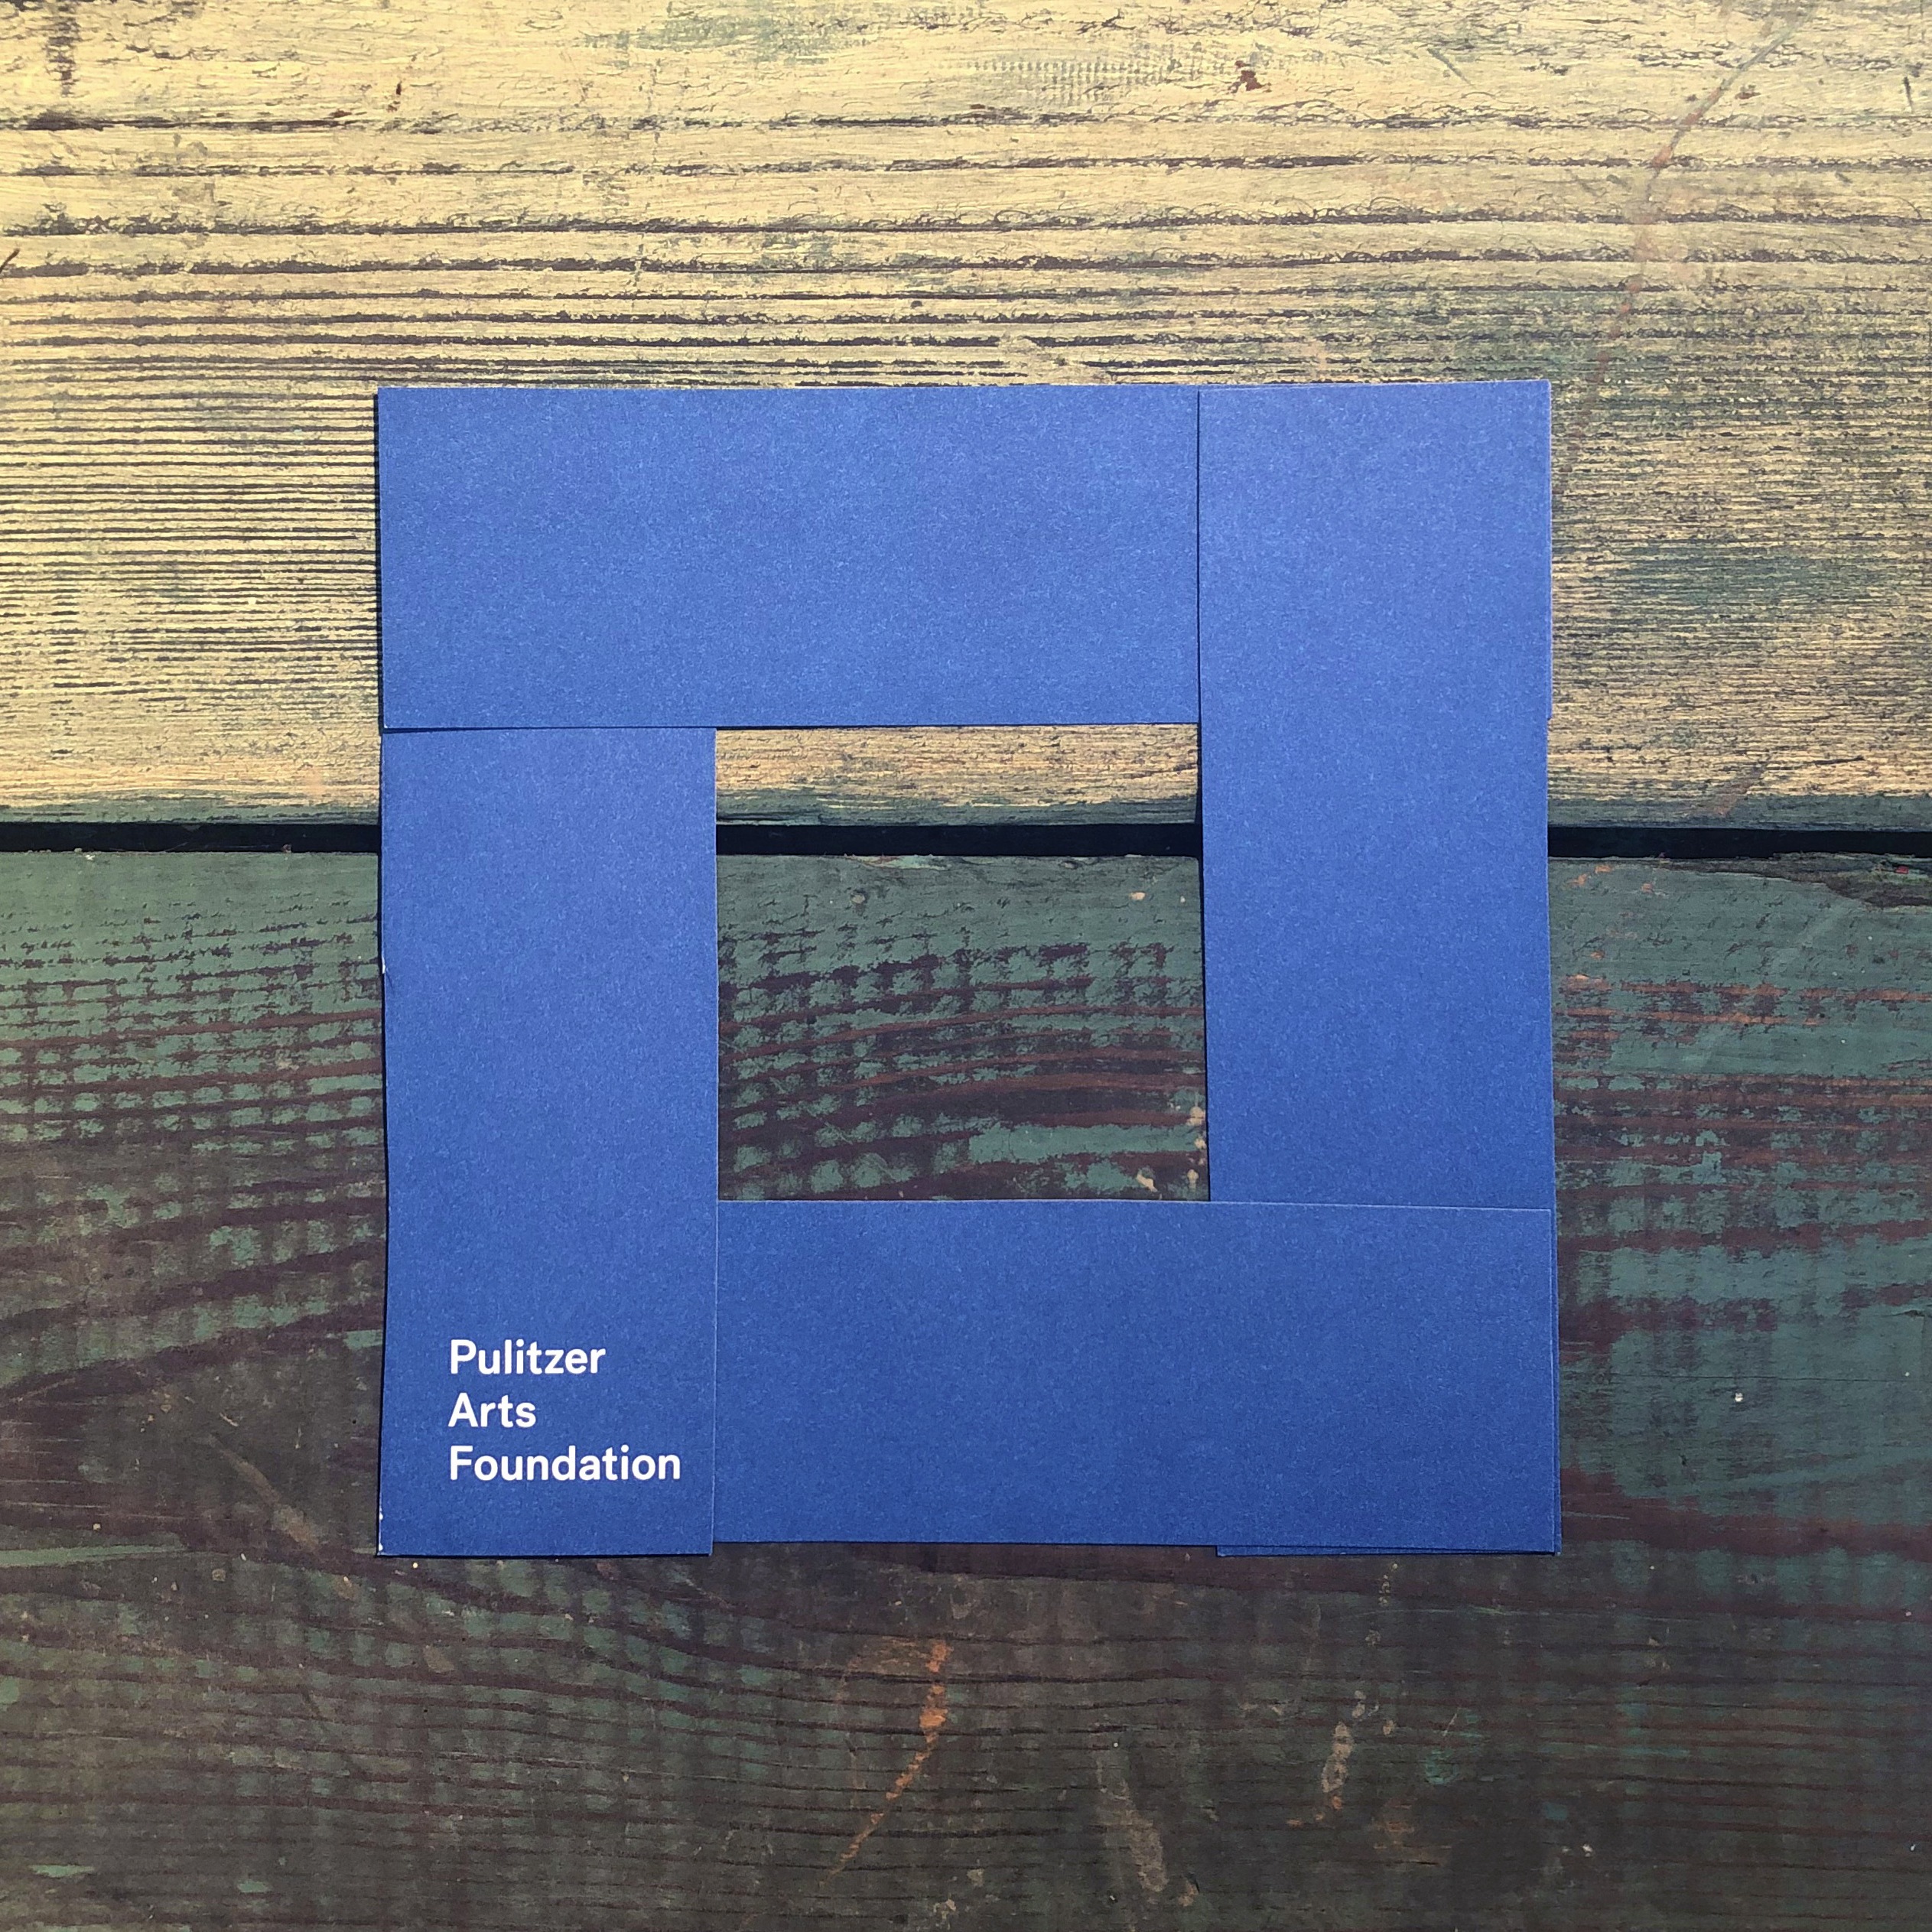 A handmade square viewfinder, made with a blue Pulitzer catalogue, on a wooden surface.